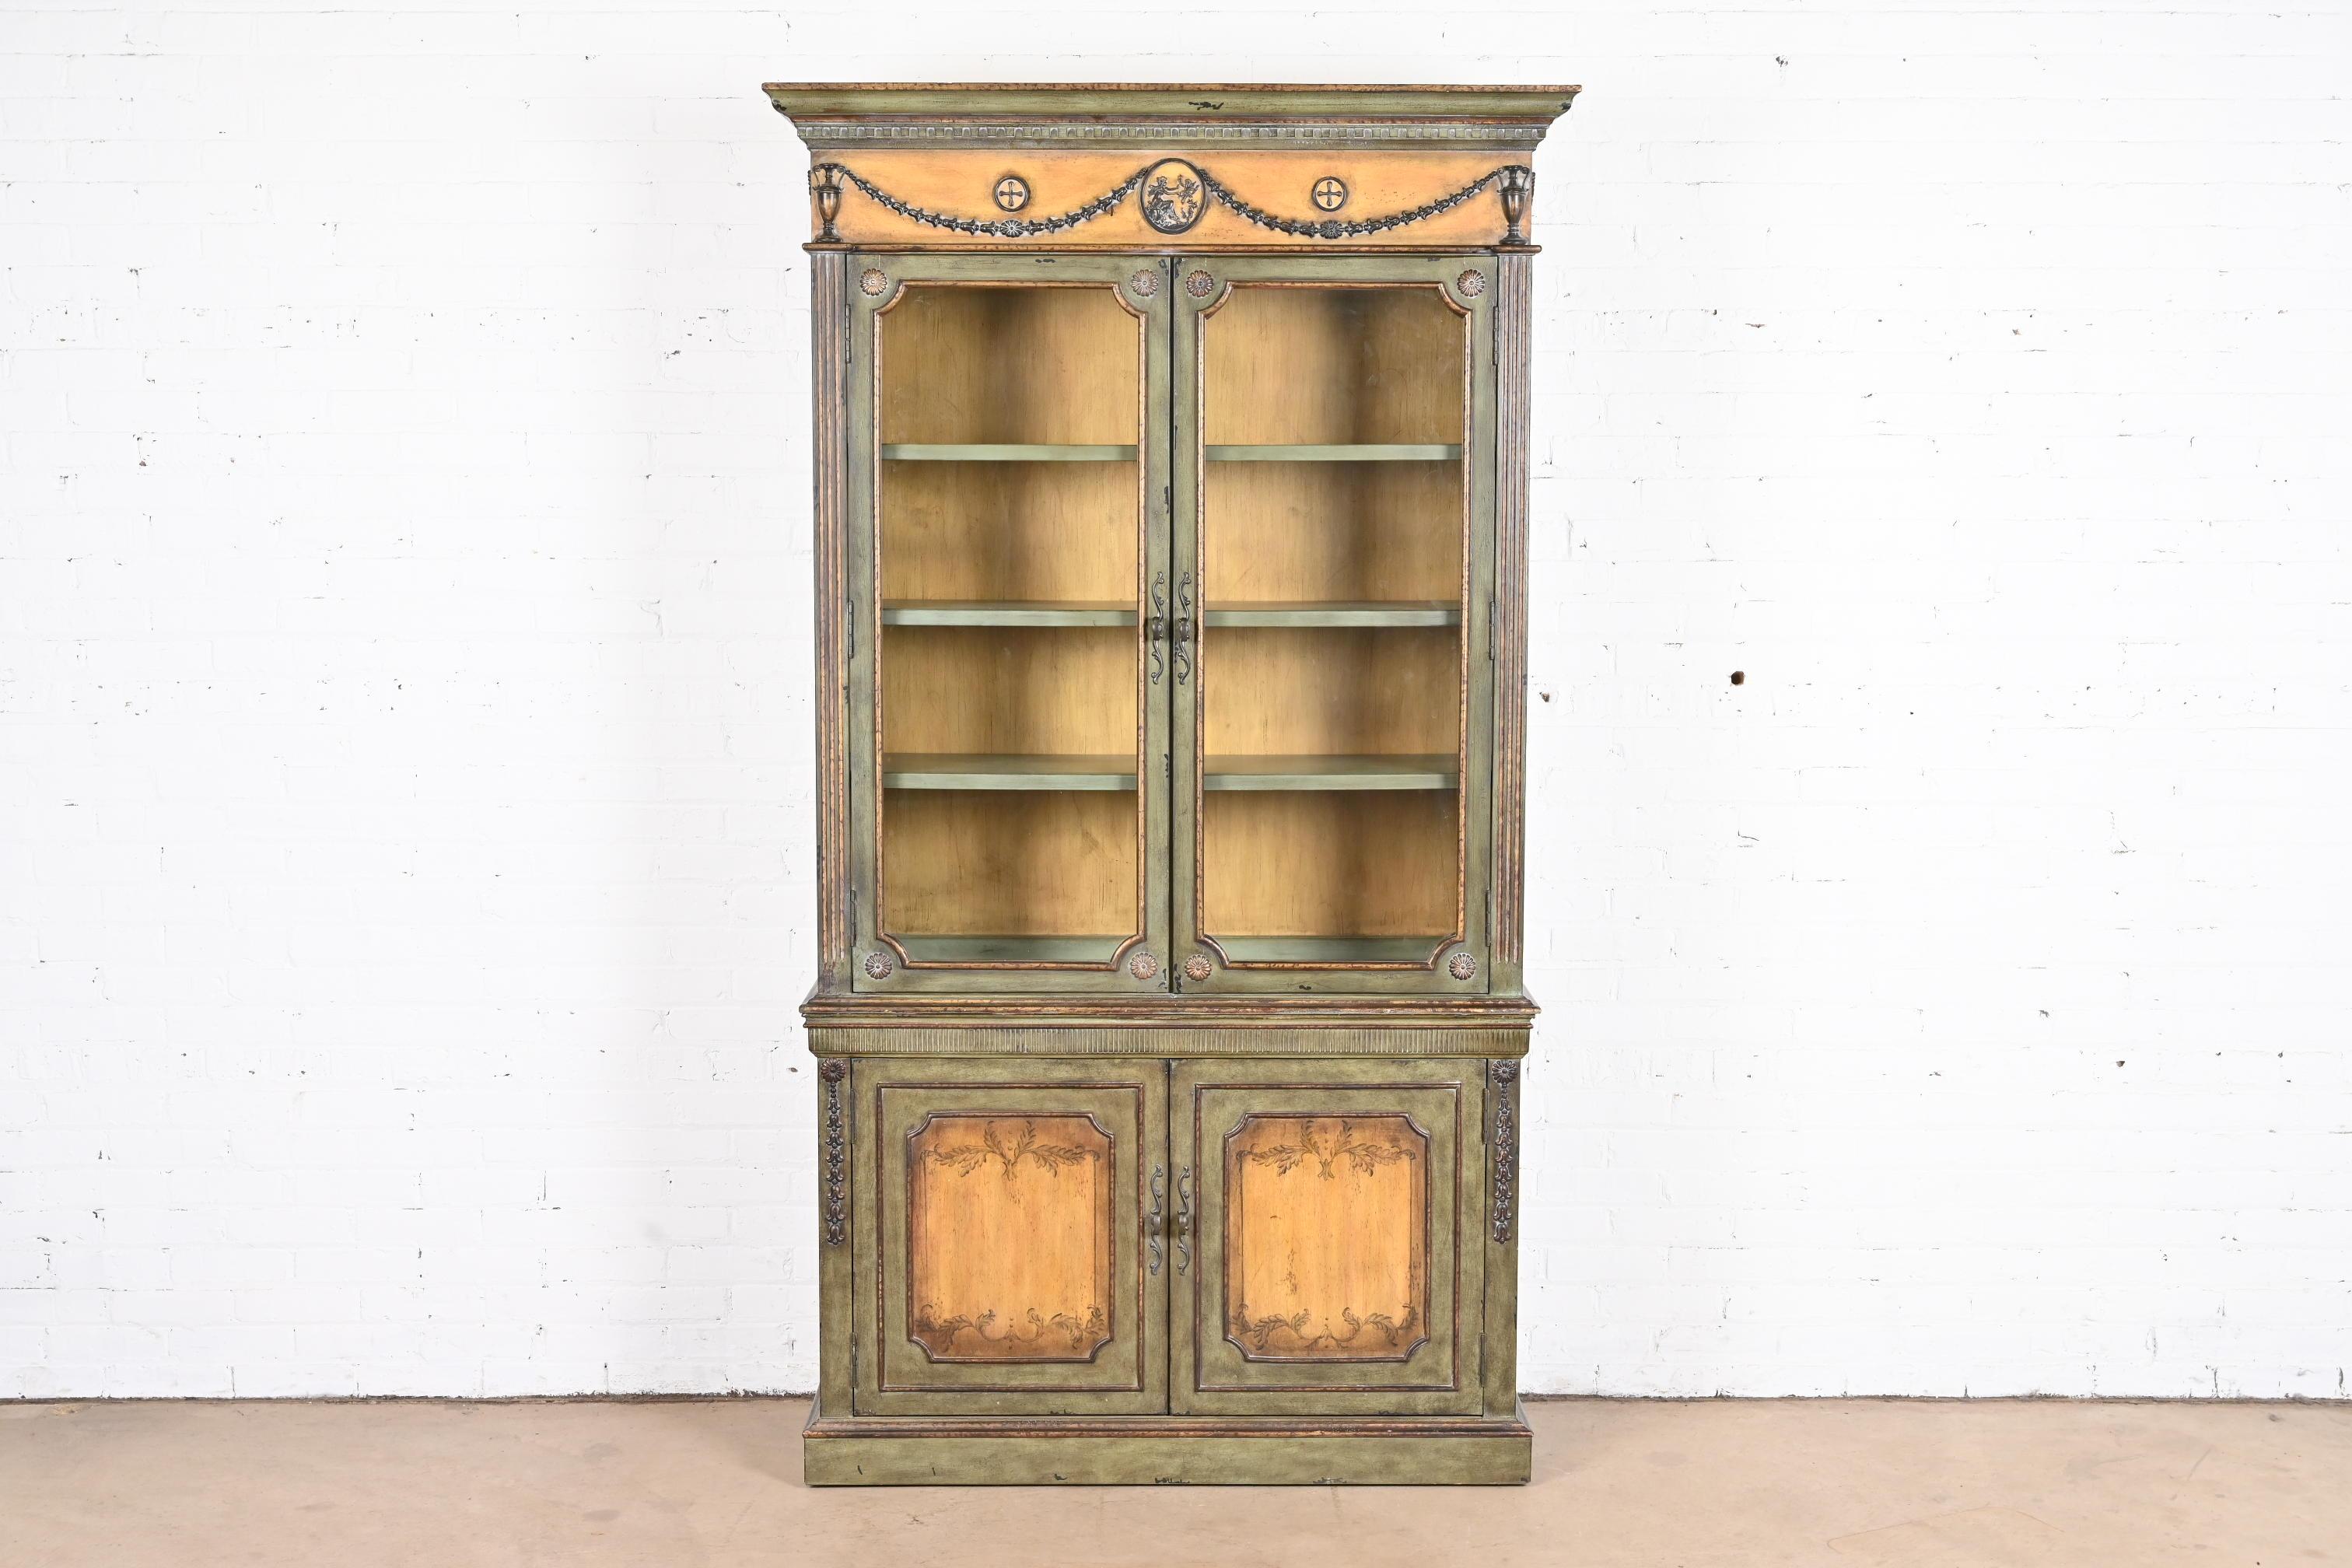 A gorgeous contemporary neoclassical Italianate breakfront bookcase cabinet

circa late 20th century

Carved and painted wood, with glass front doors.

Measures: 48